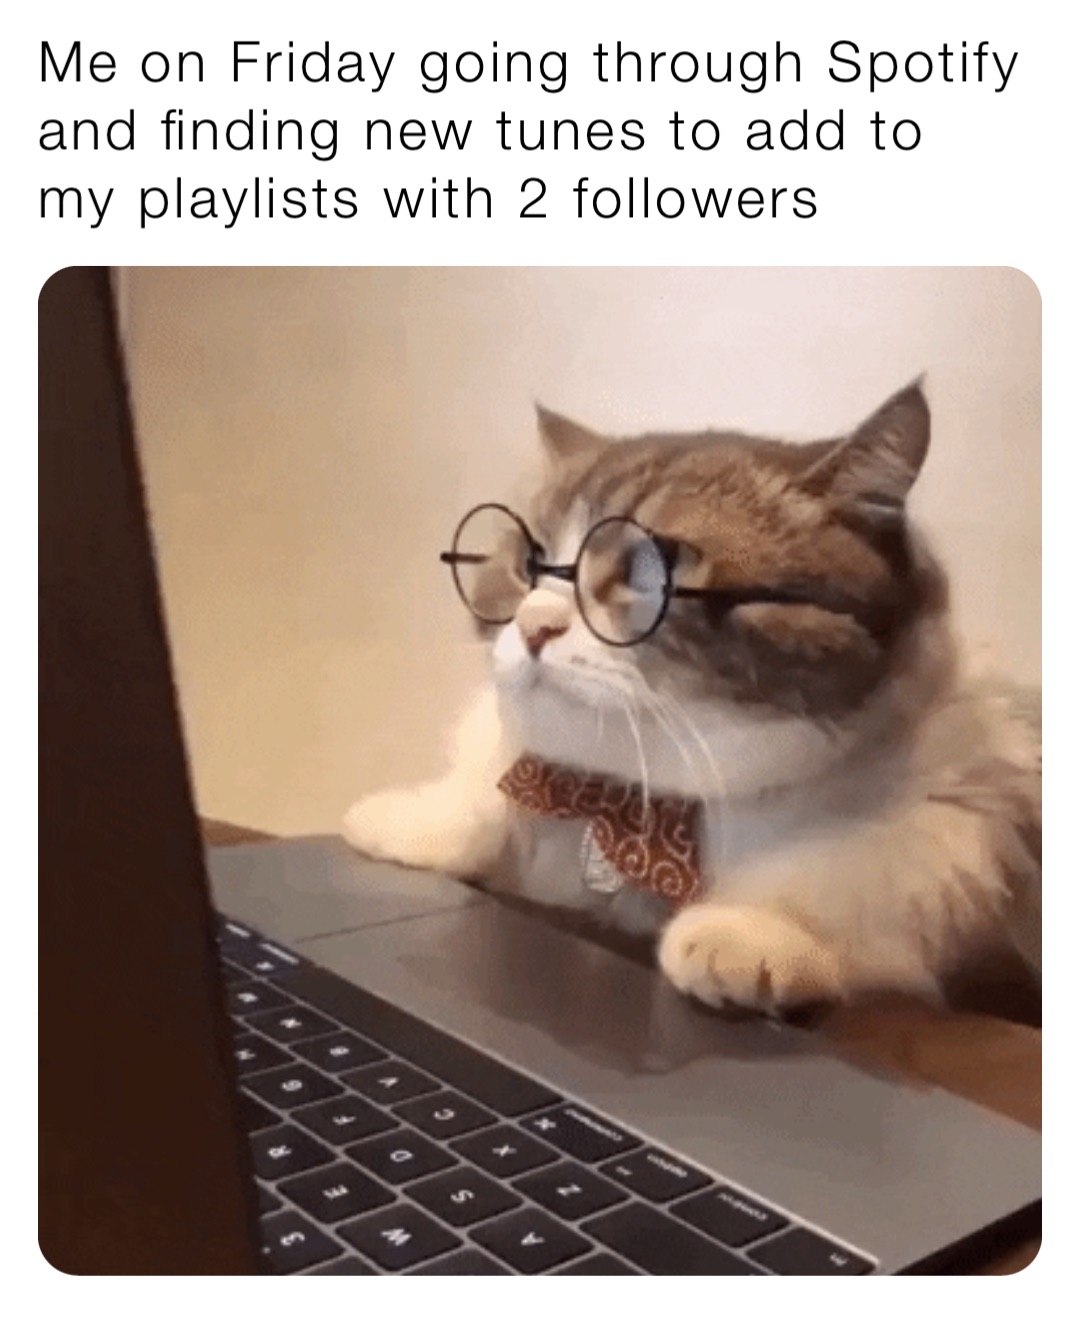 Me on Friday going through Spotify and finding new tunes to add to my playlists with 2 followers